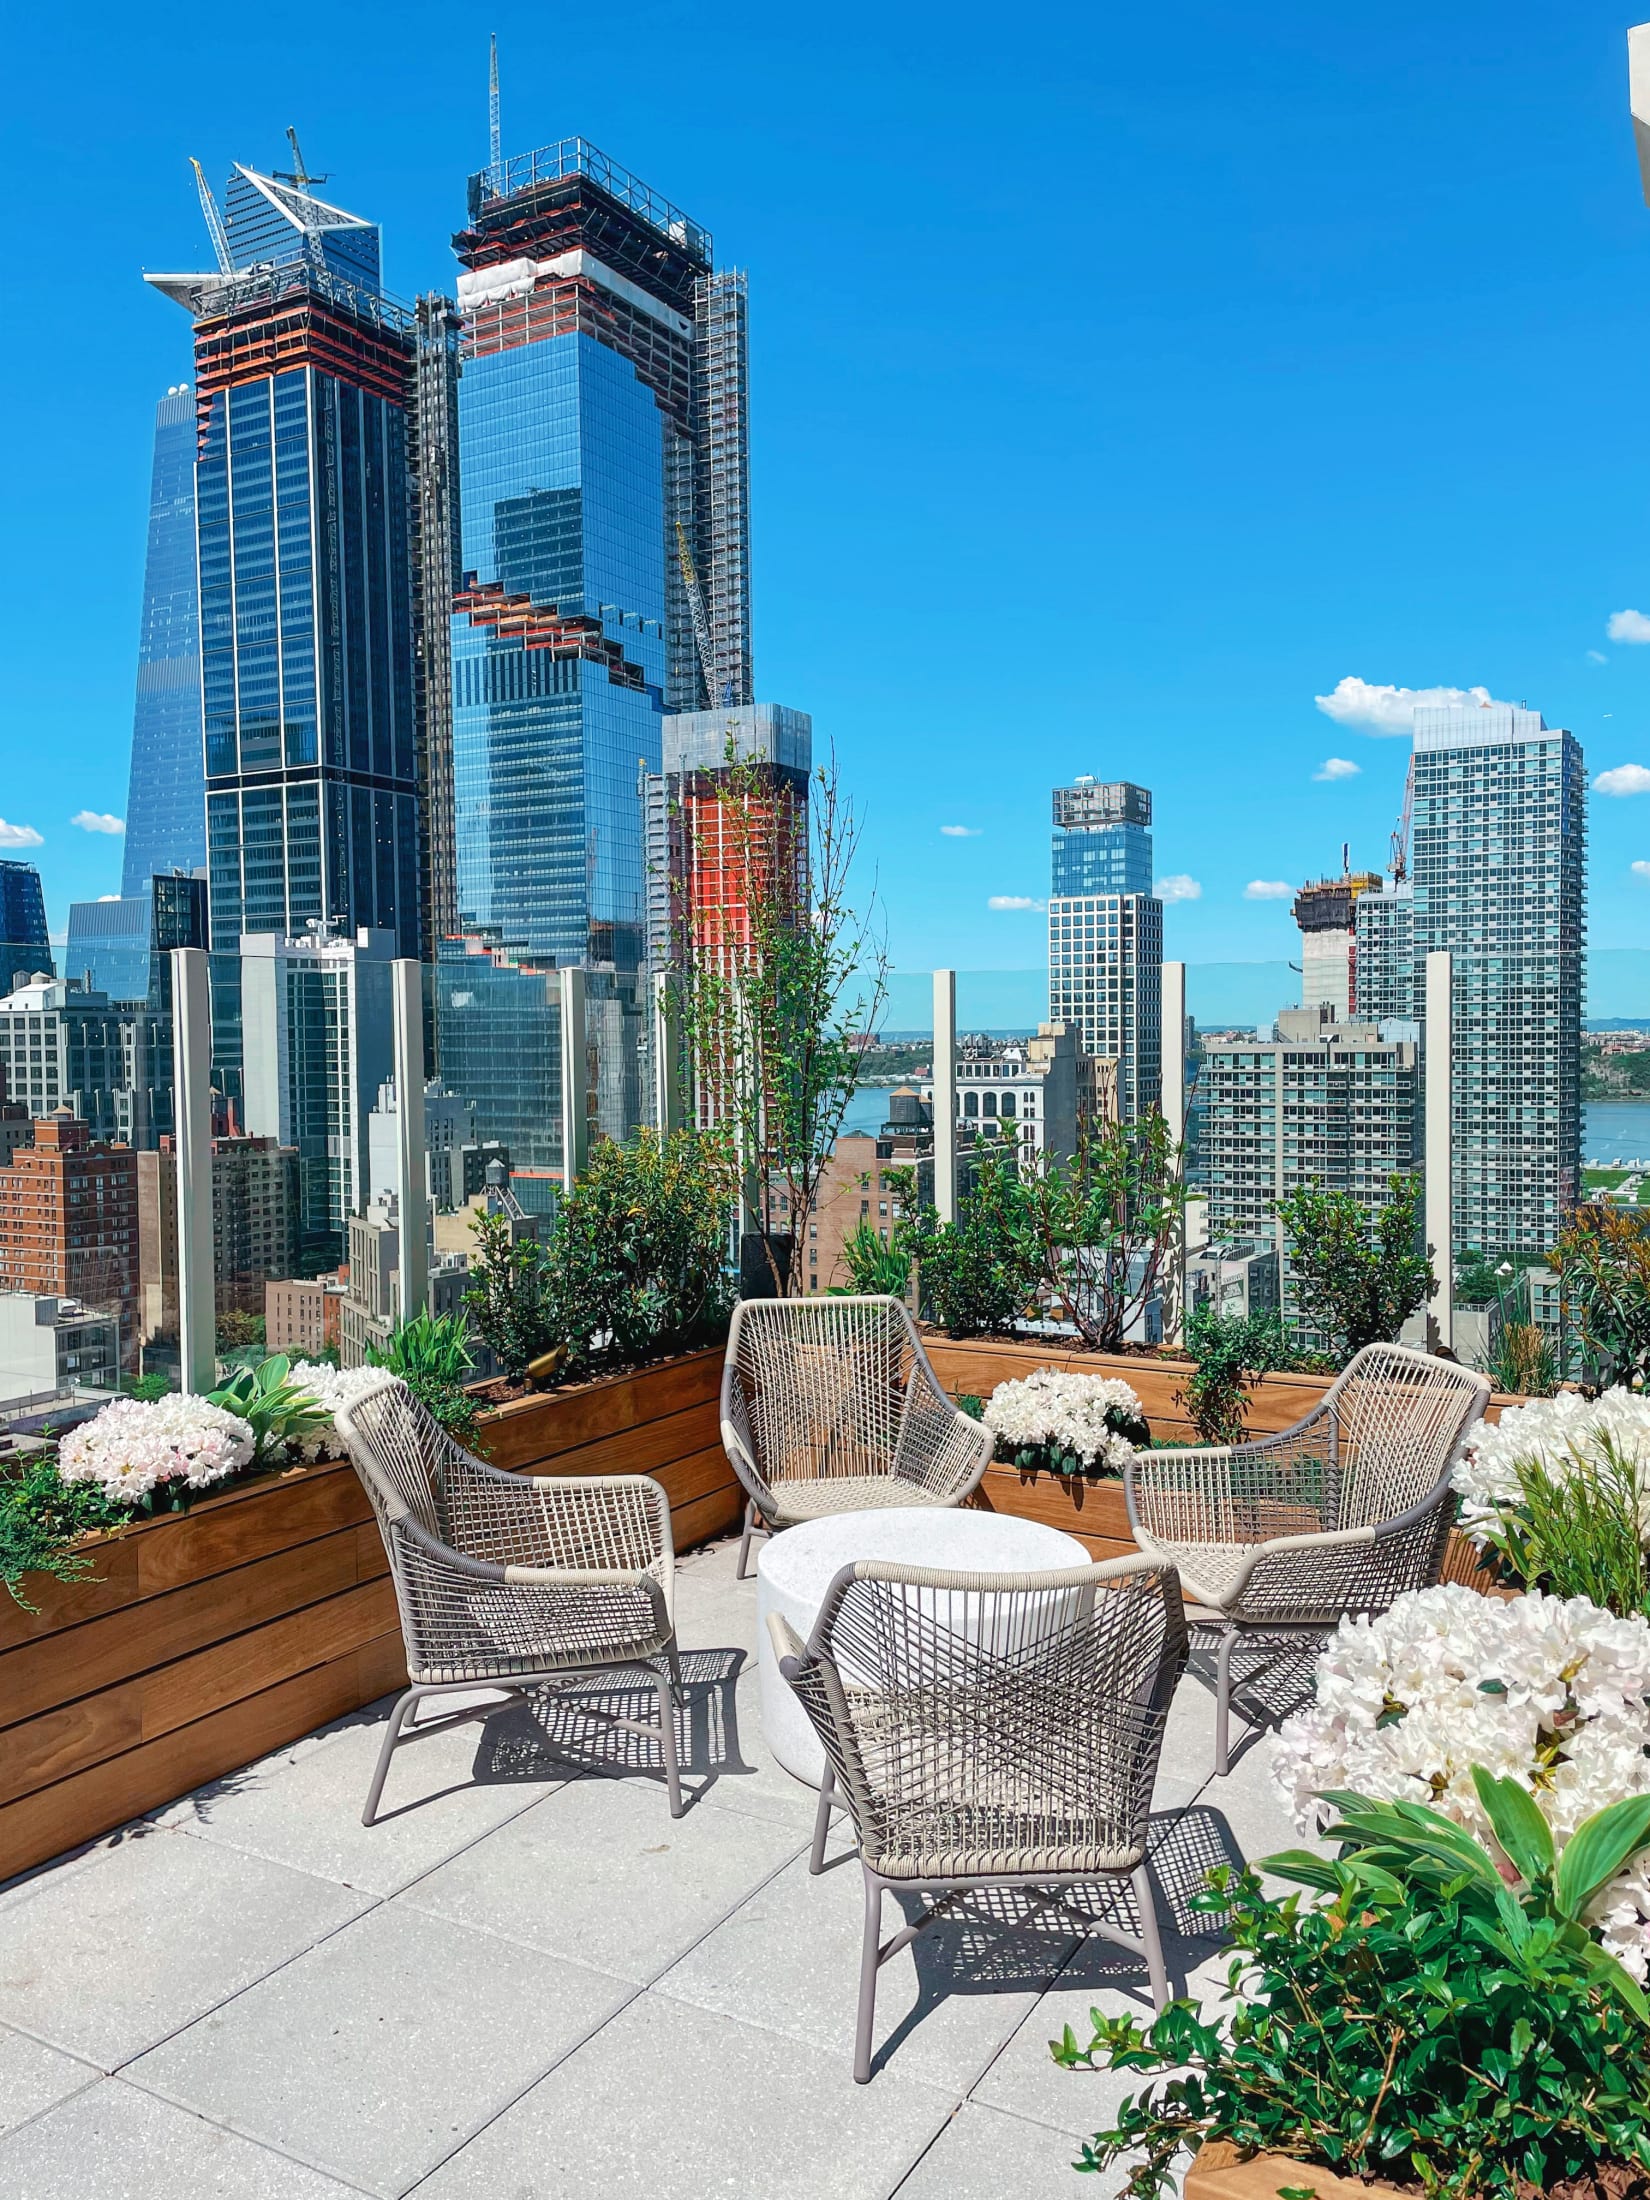 Arlo Midtown outdoor lounge space with New York City skyline in background